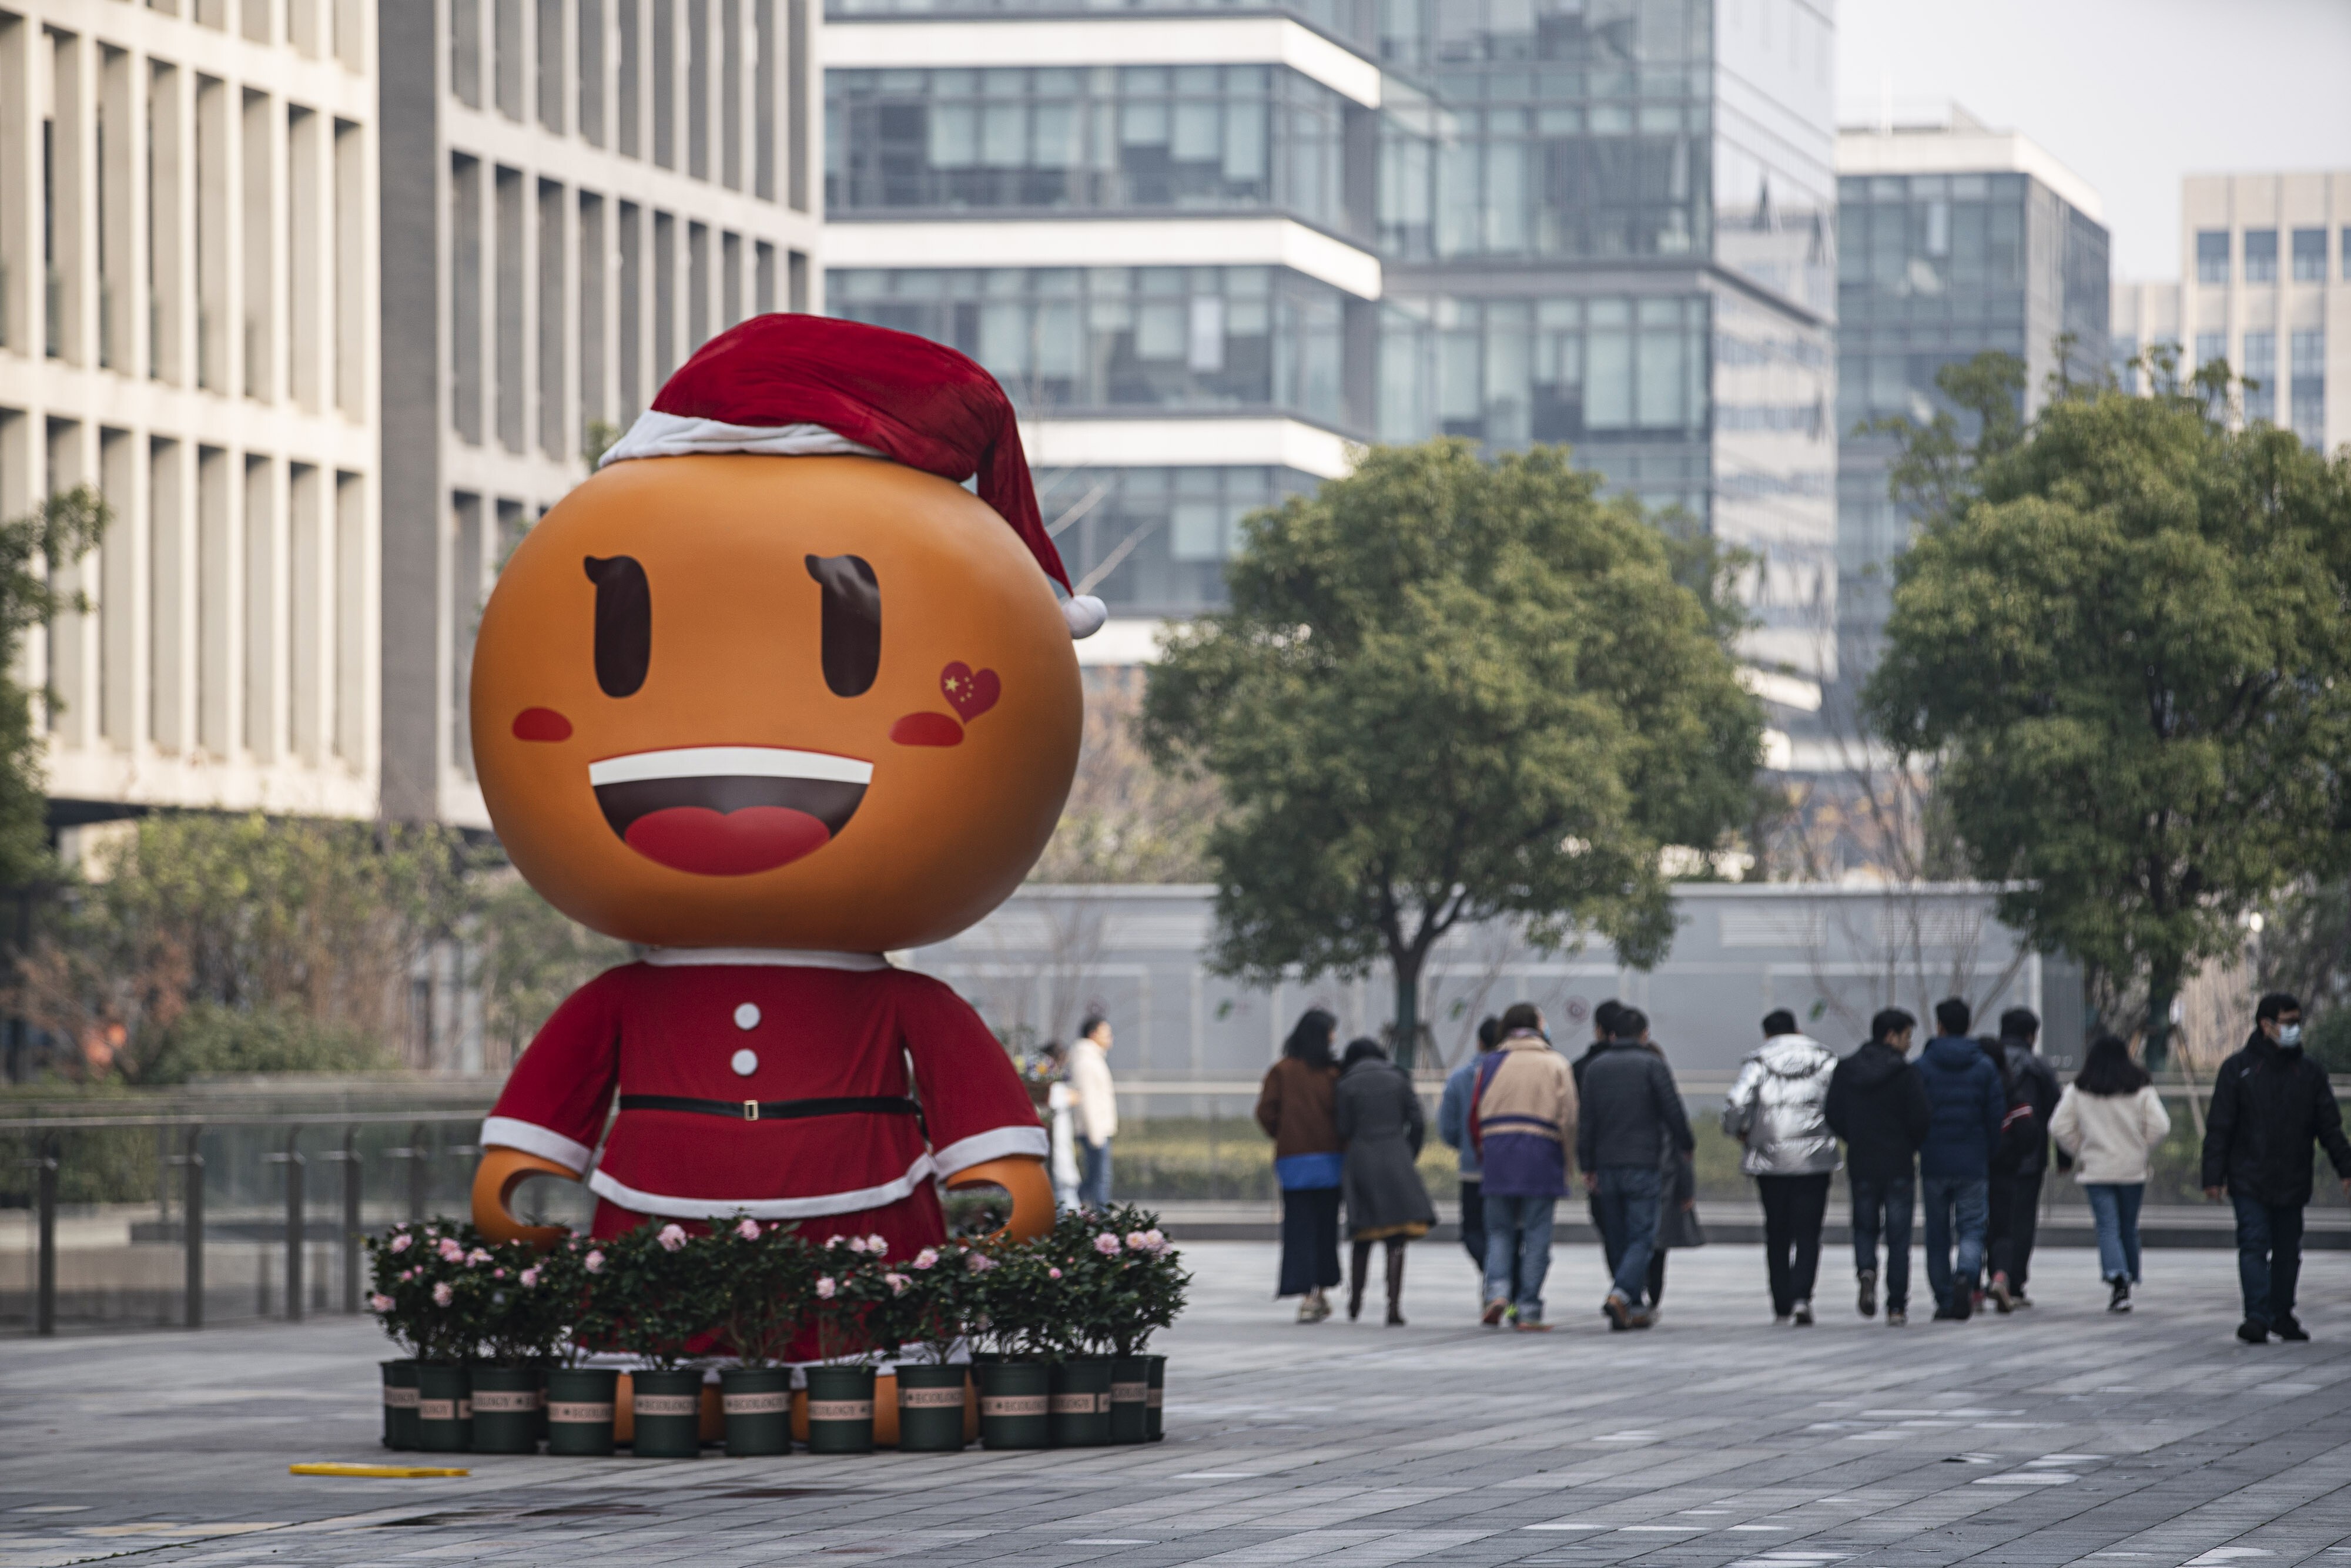 The mascot for Taobao is seen outside an Alibaba Group Holding Ltd. office building in Shanghai, China, on Thursday. Photo: Bloomberg